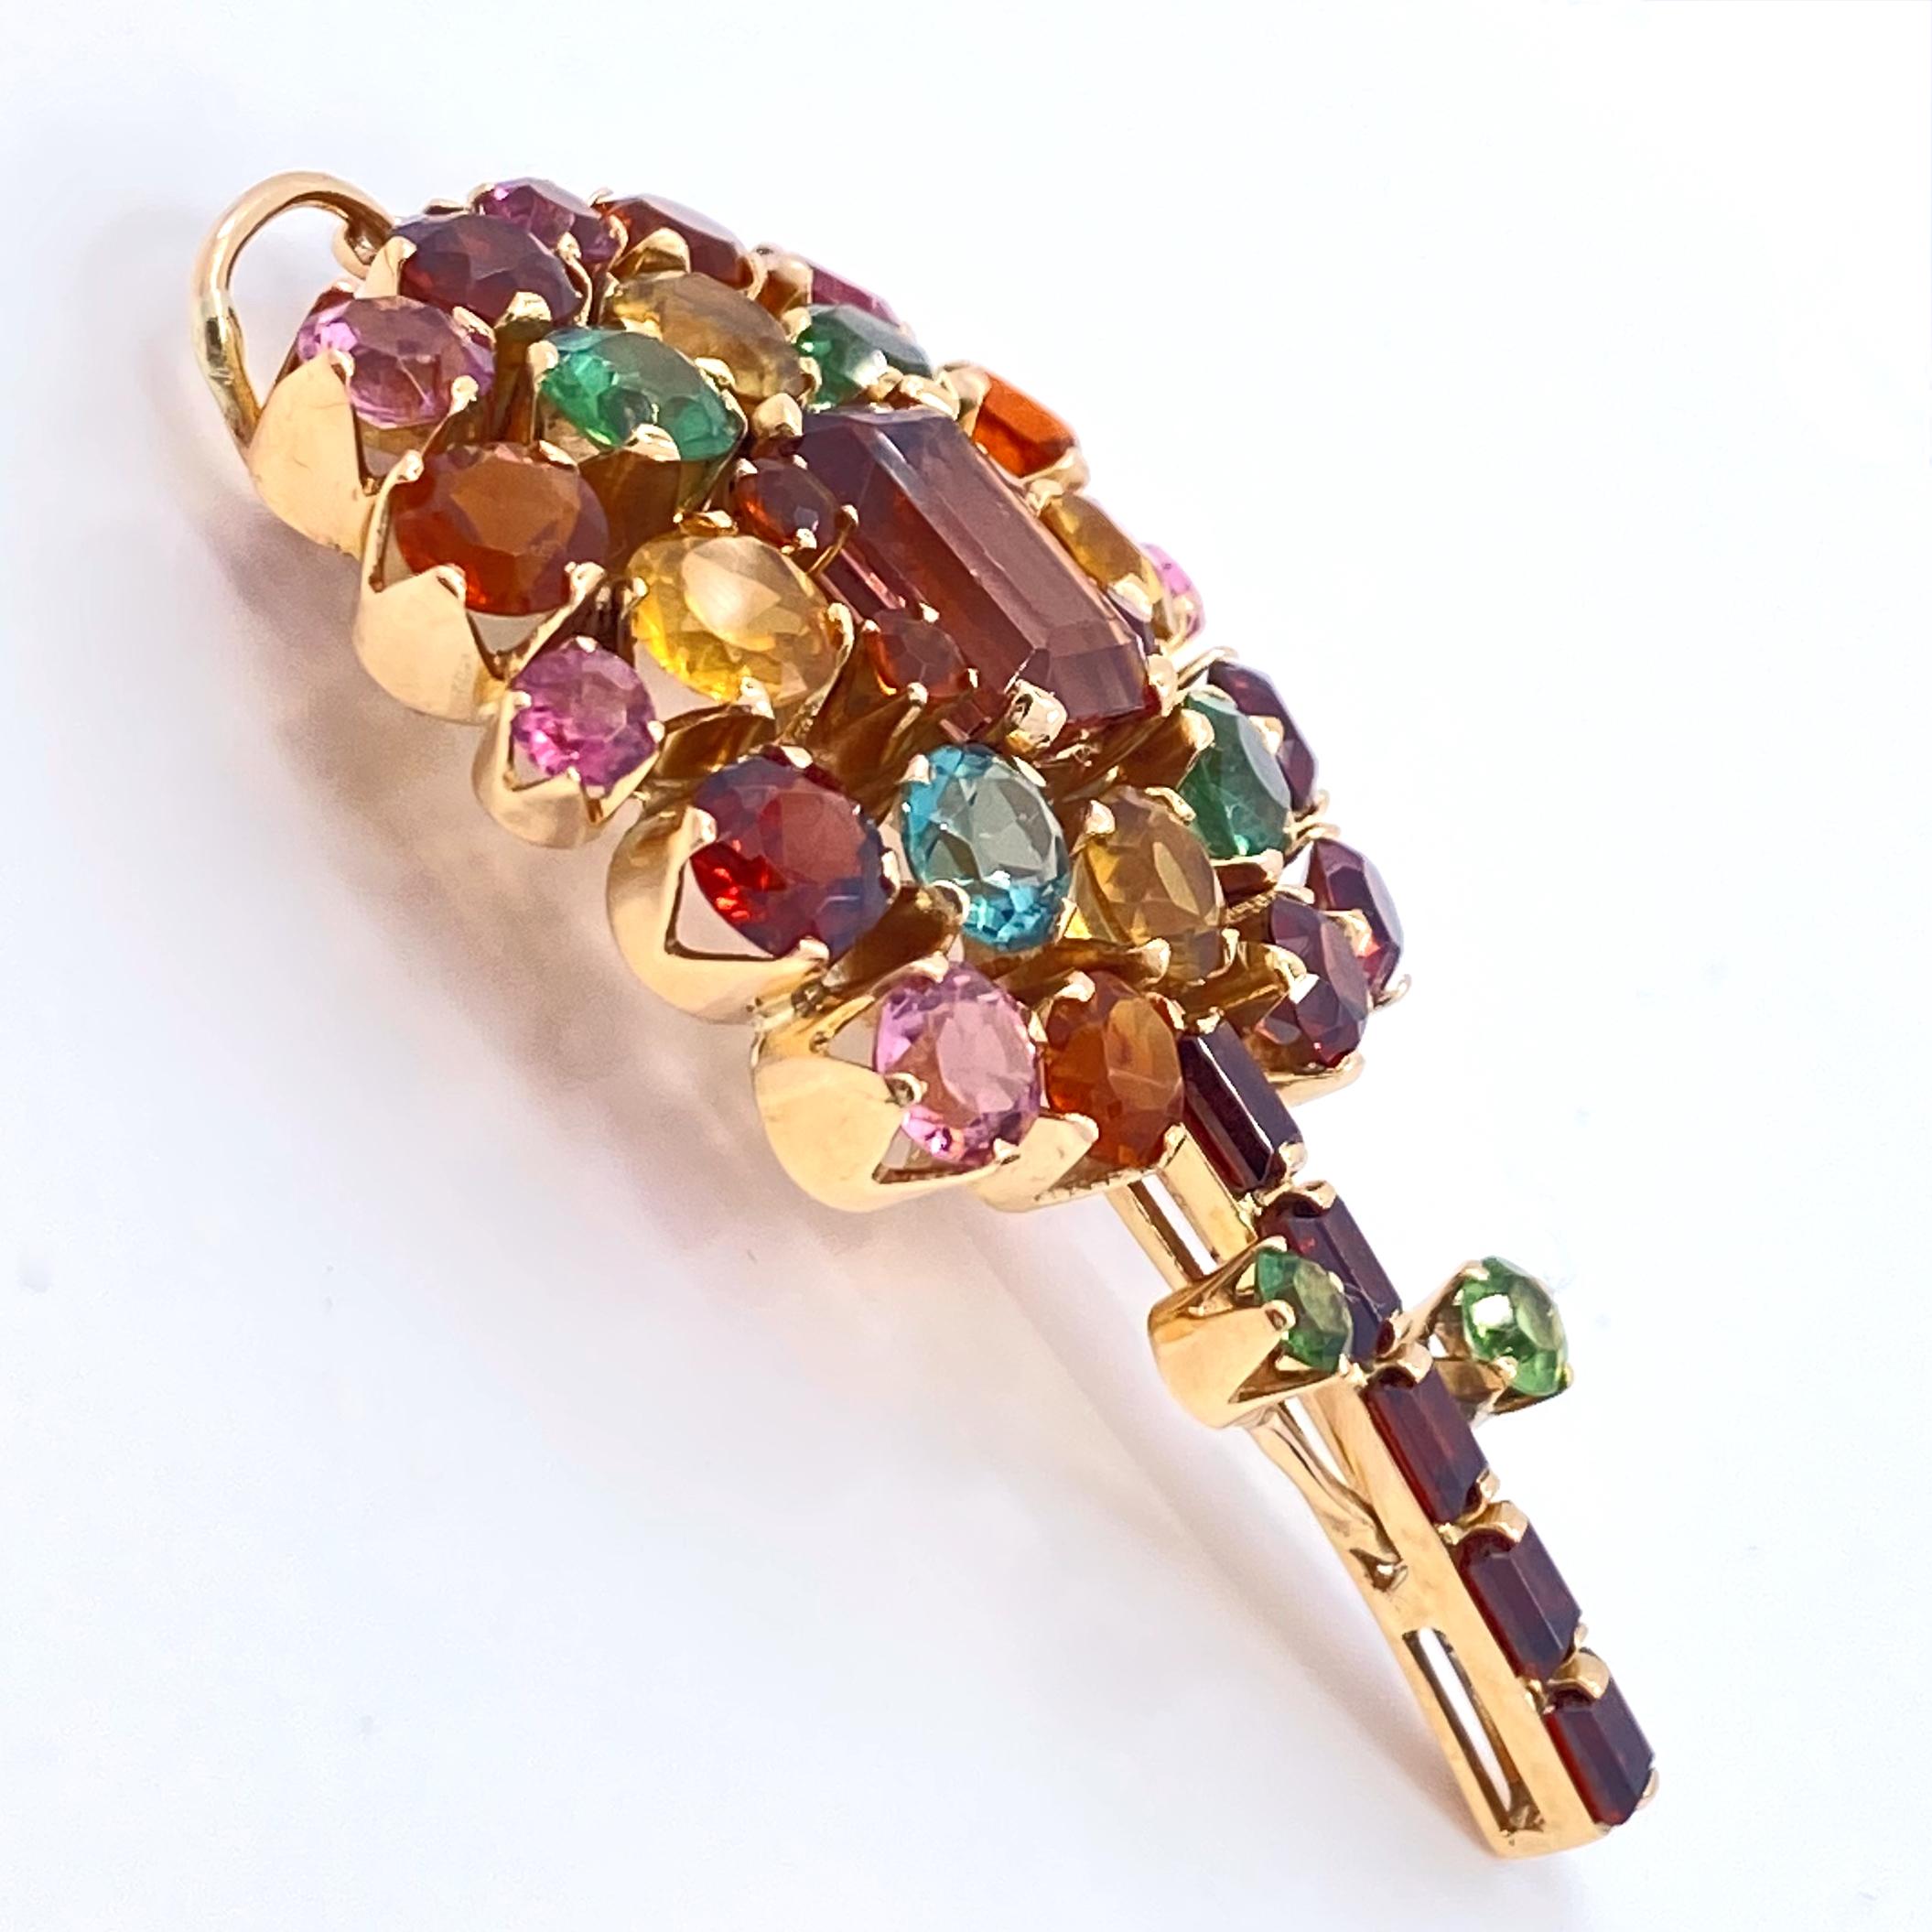 Flower Pendant in Yellow Gold with Nine Carats of Tourmaline, Garnet & Citrine For Sale 2